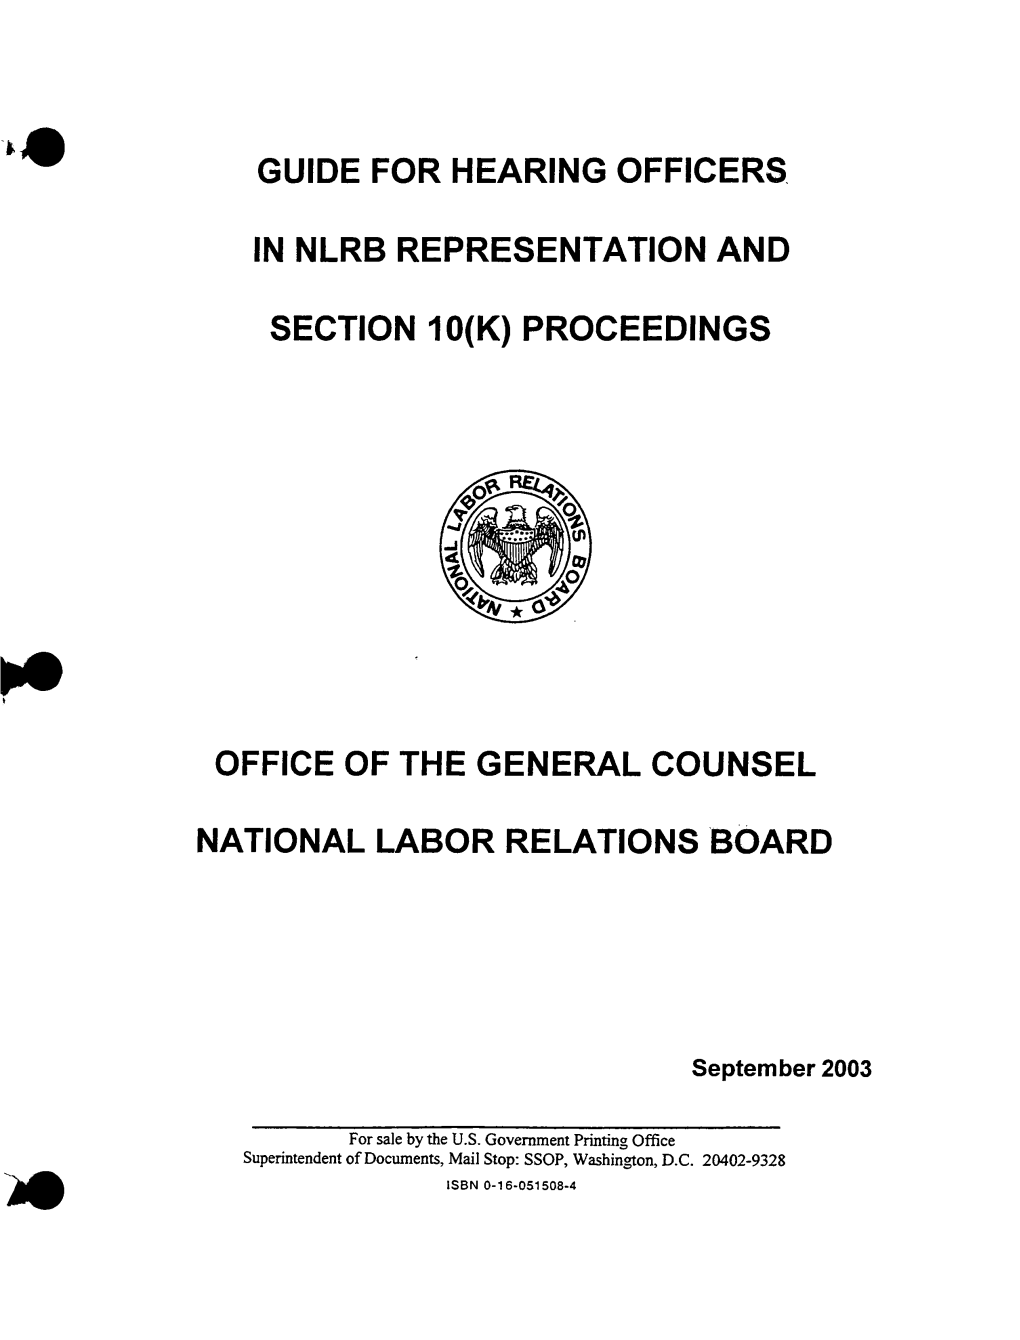 NLRB Guide for Hearing Officers